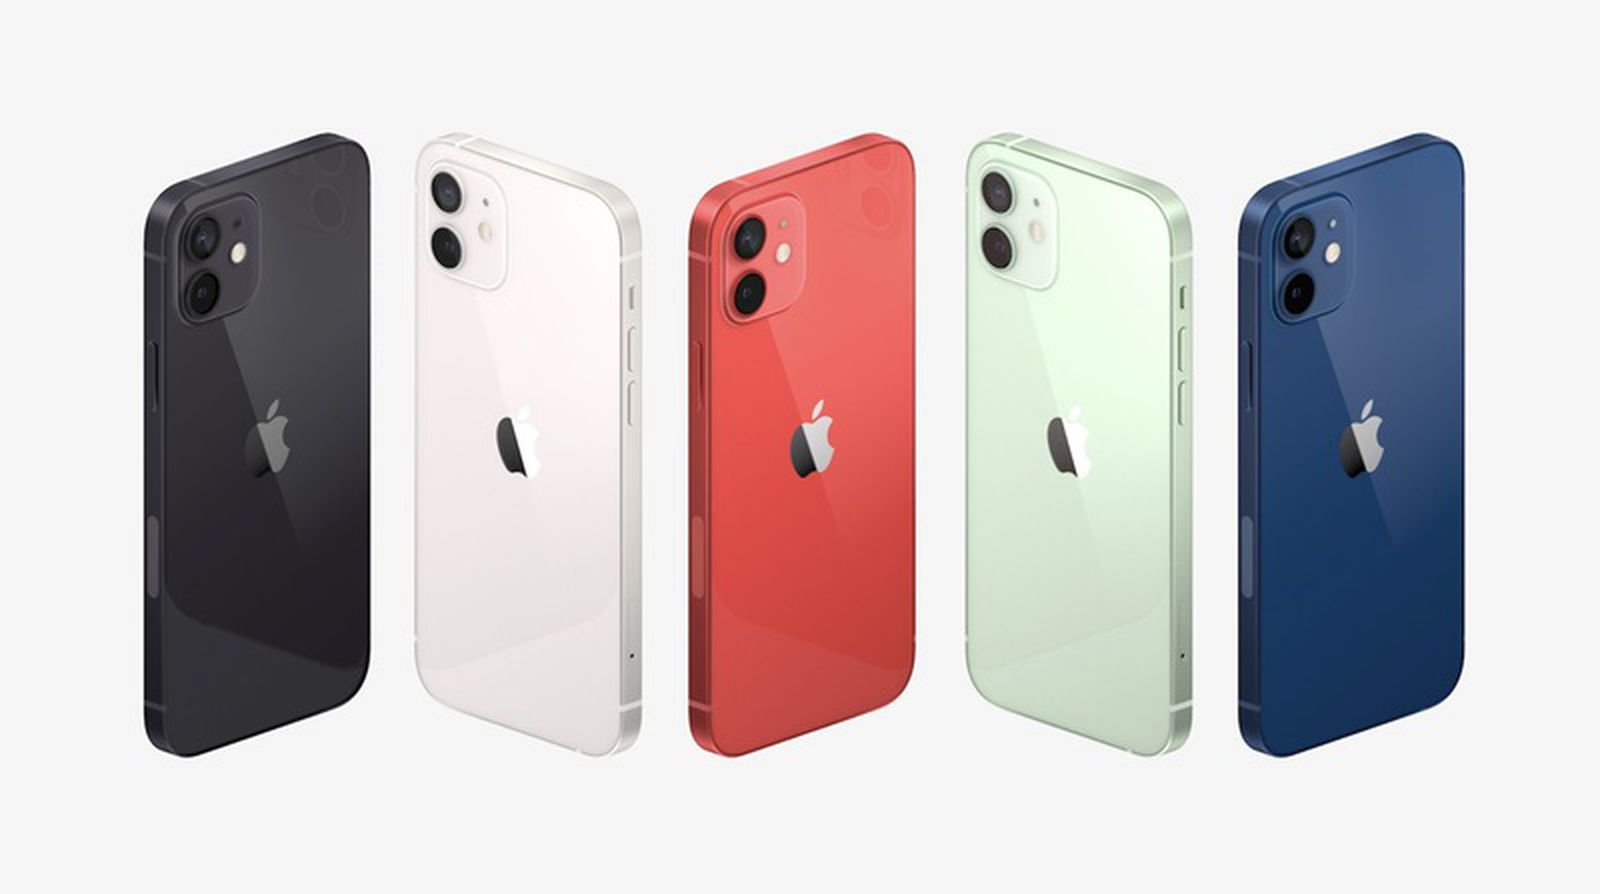 iPhone 12 Introduced With Flat-Edge Design, 5G, A14 Chip, New Colors, MagSafe, and More - MacRumors